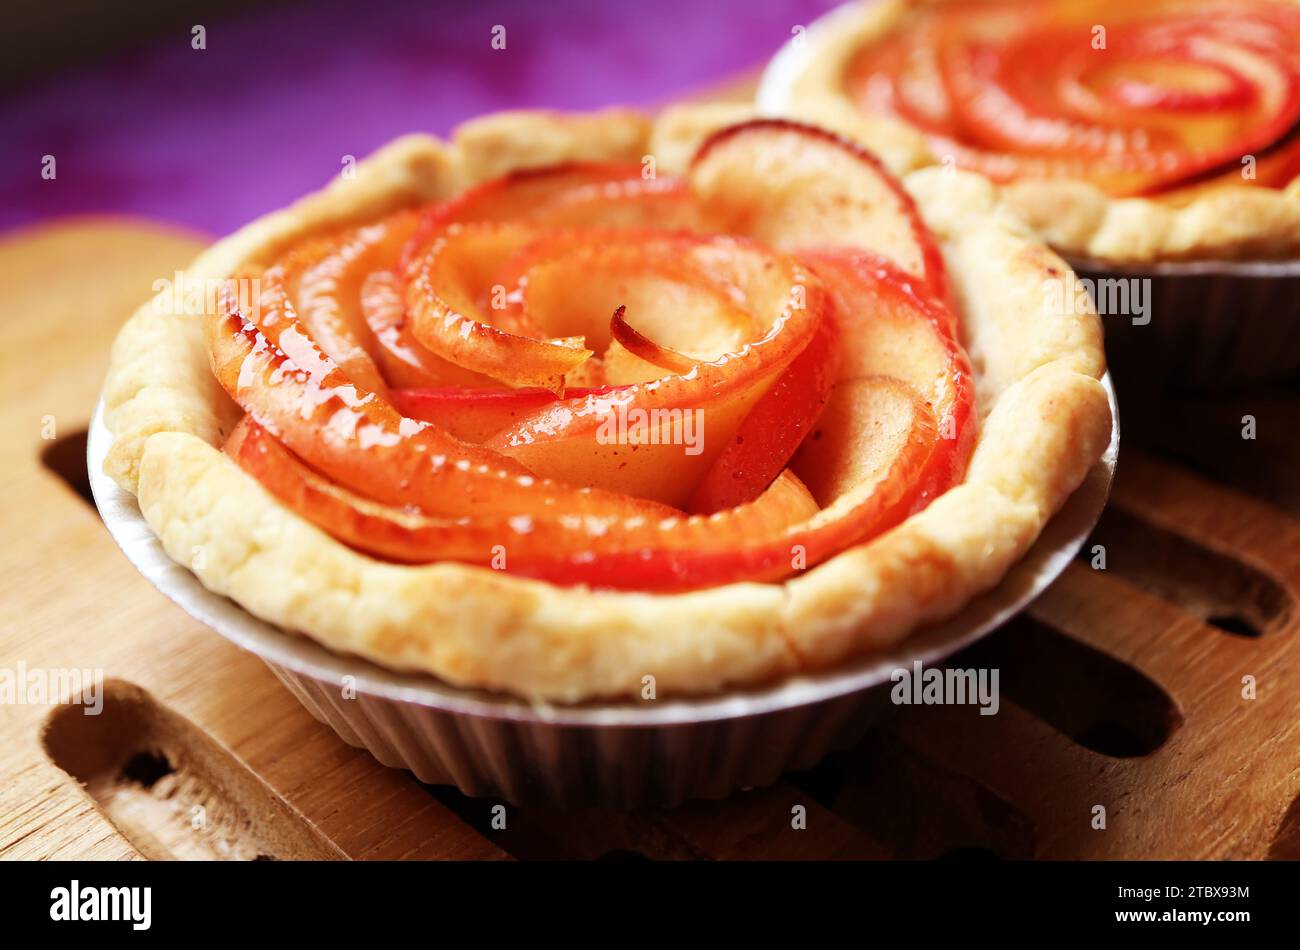 Closeup of a Delectable Freshly Baked Rose Shaped Apple Tartlet Stock Photo